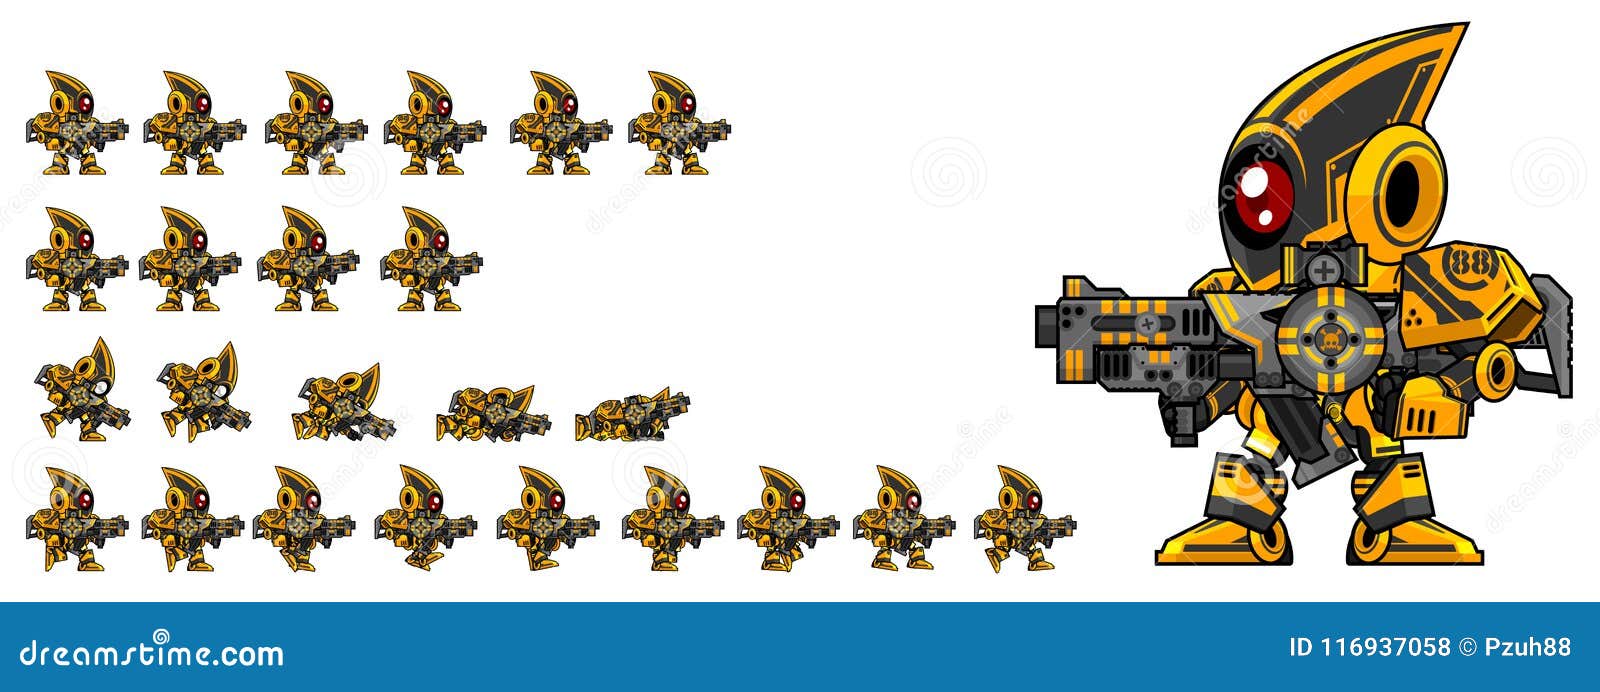 animated robot character sprites